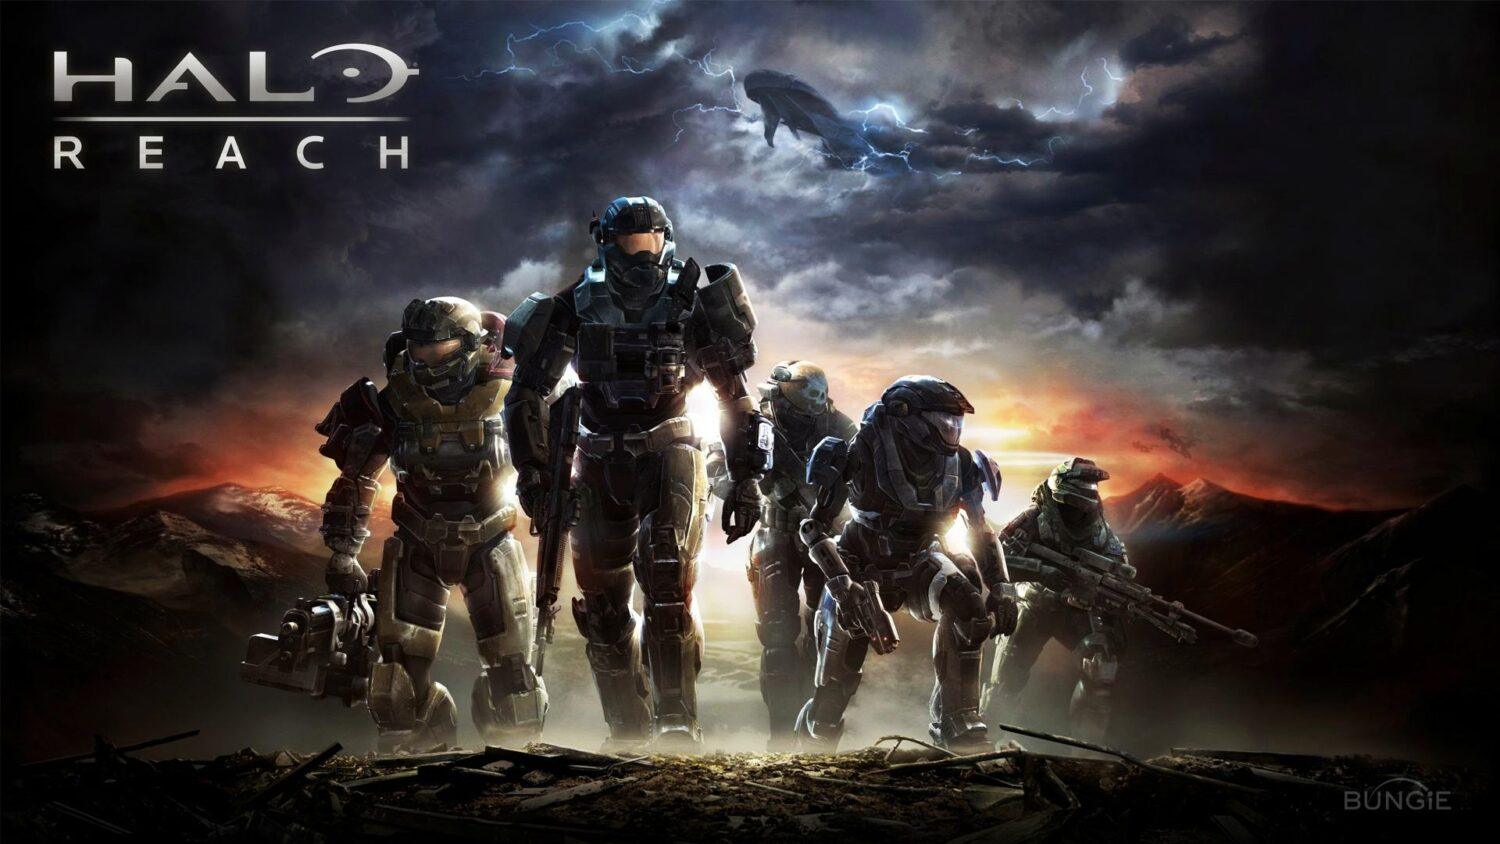 Halo : The Master Chief Collection - Halo Reach 